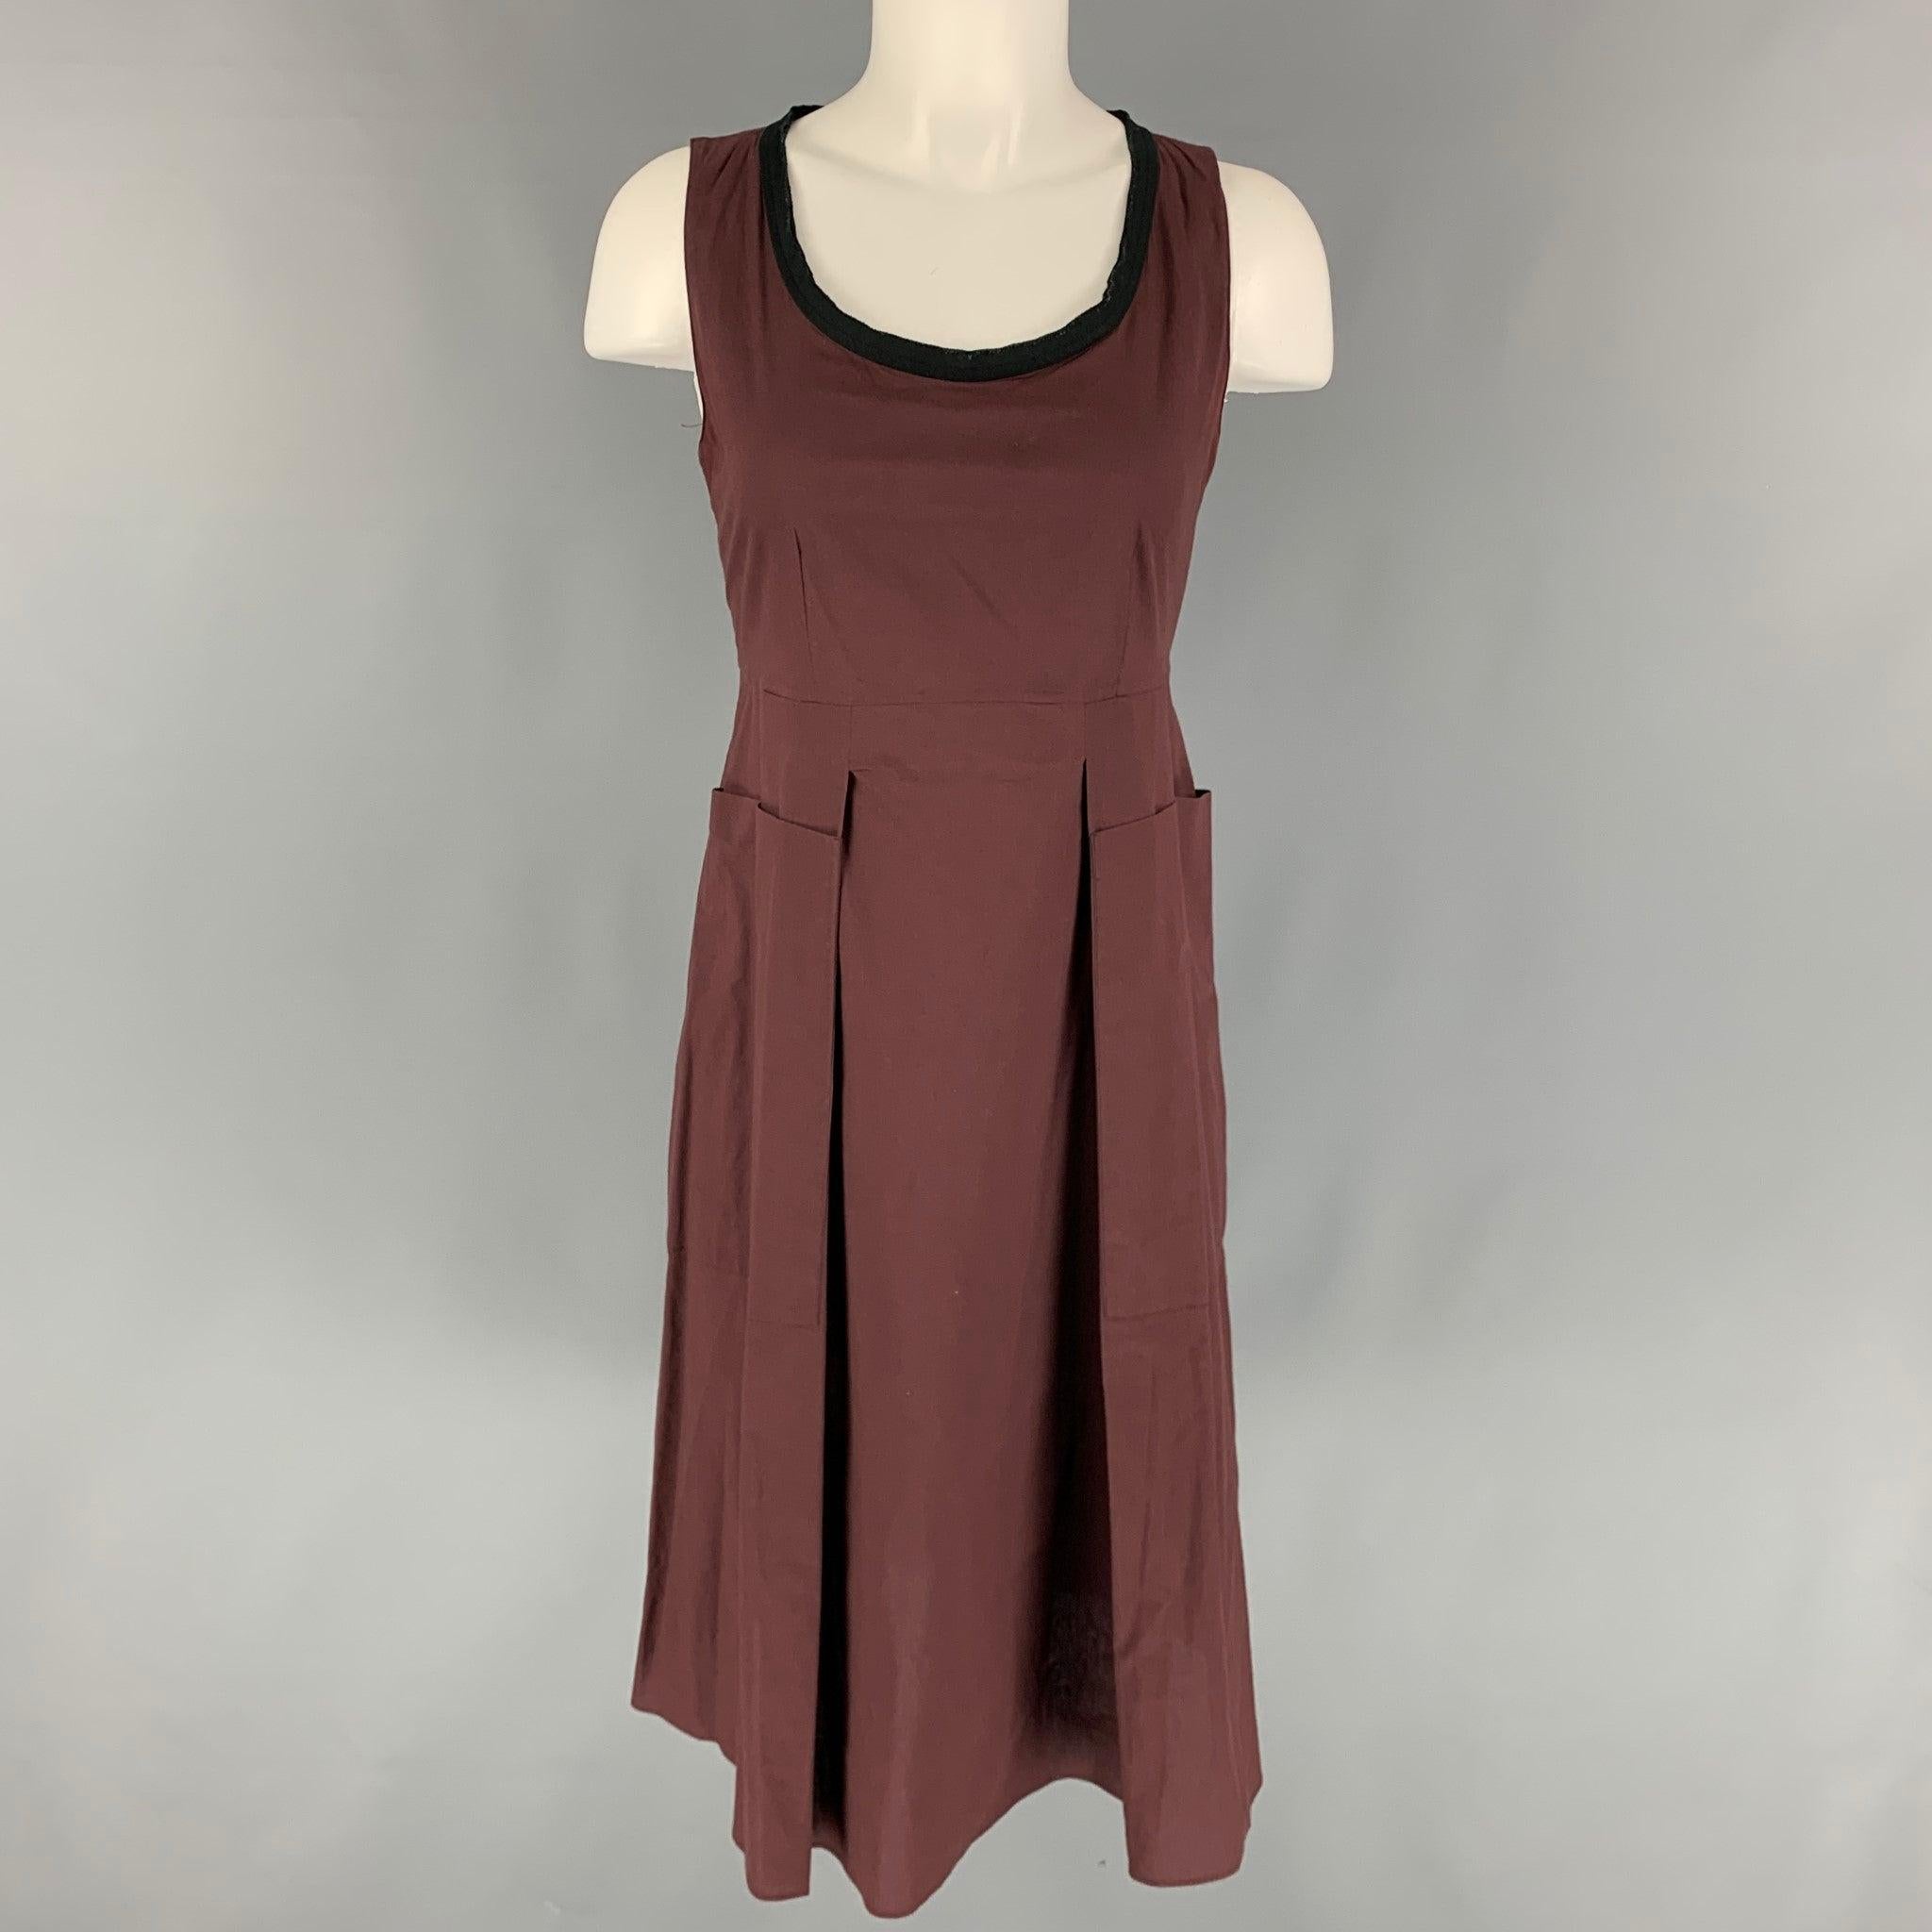 MARNI SS 13 2 Piece dress set comes in a burgundy cotton featuring a sleeveless style, black trim, pleated, front pockets, back zip up closure, and a matching coat. Made in Portugal.
Very Good
Pre-Owned Condition. 

Marked:   40 

Measurements: 
 